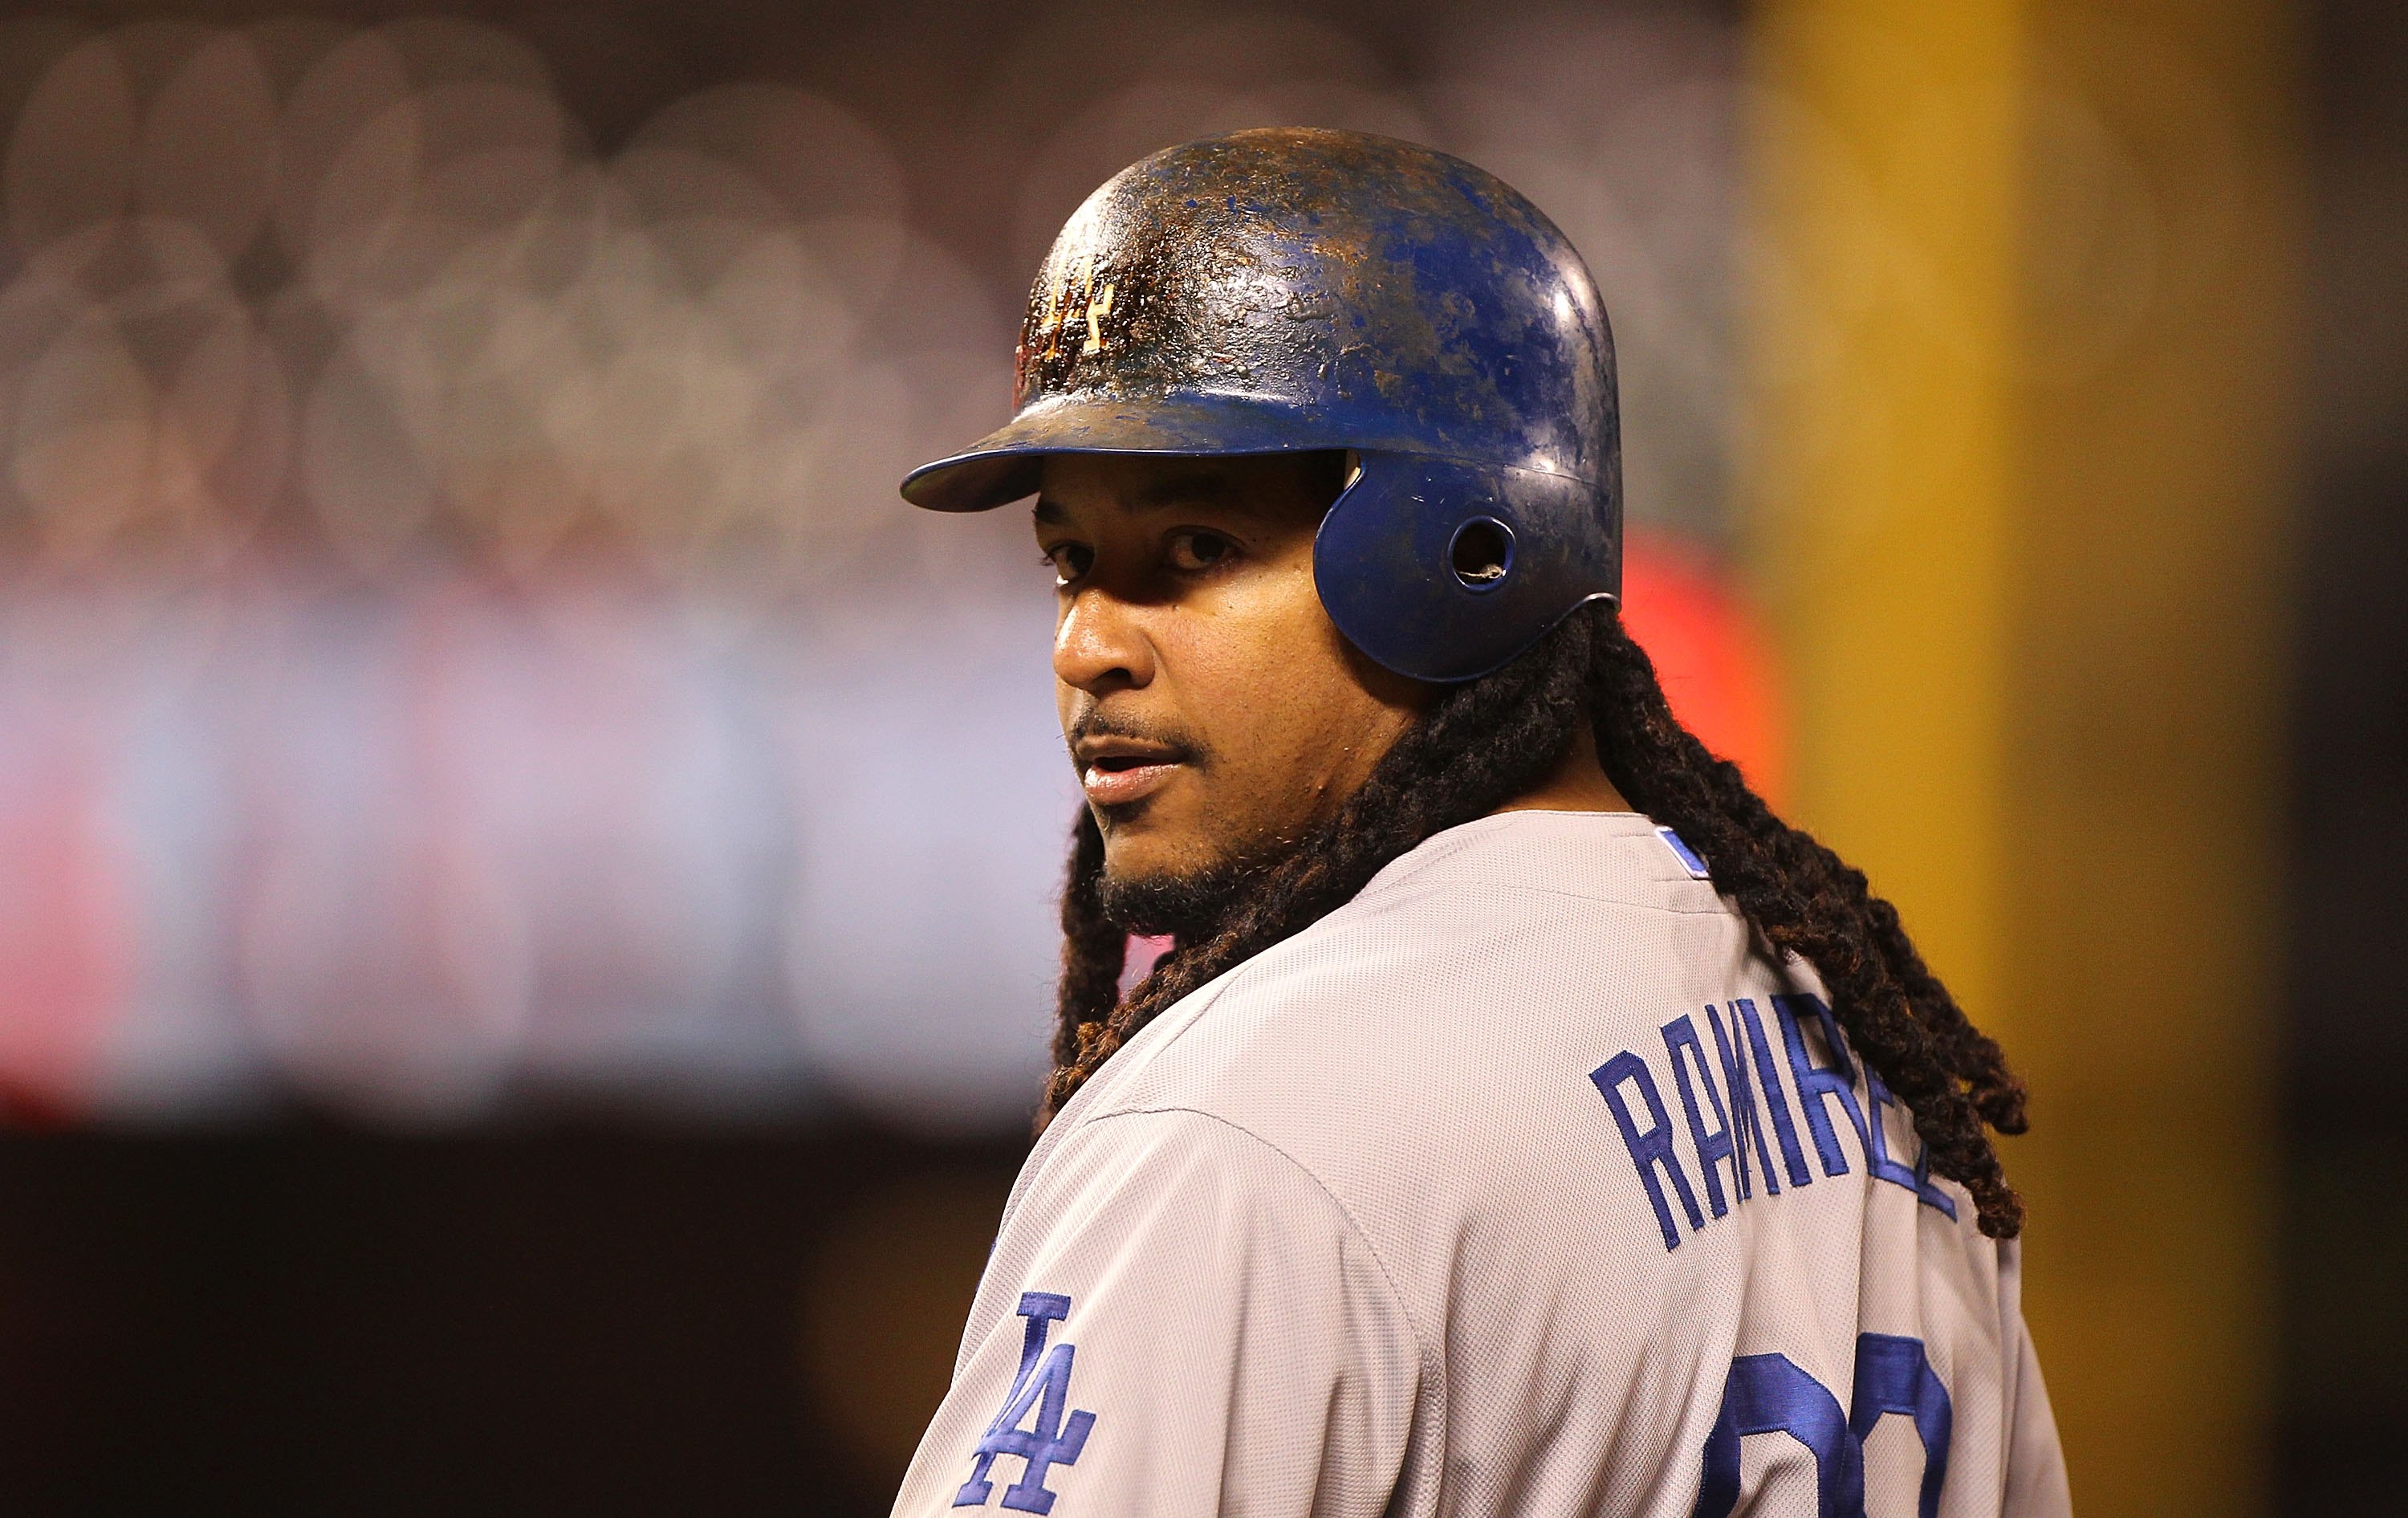 Hall of Fame: Don't look for Manny Ramirez anytime soon - Sports Illustrated